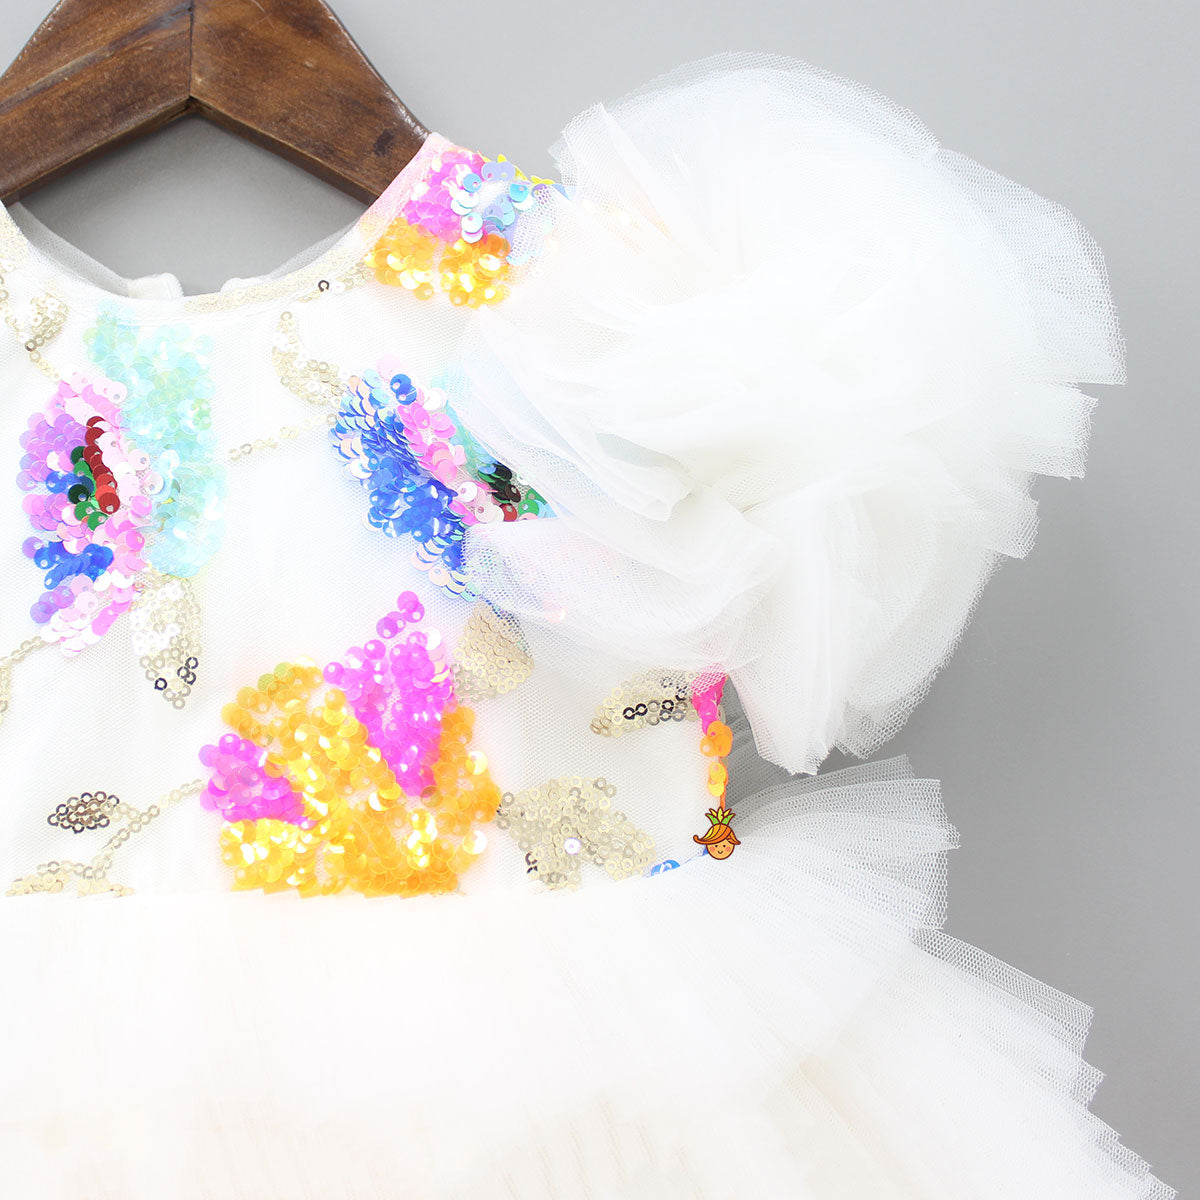 Colourful Sequins Embellished White Fancy Dress